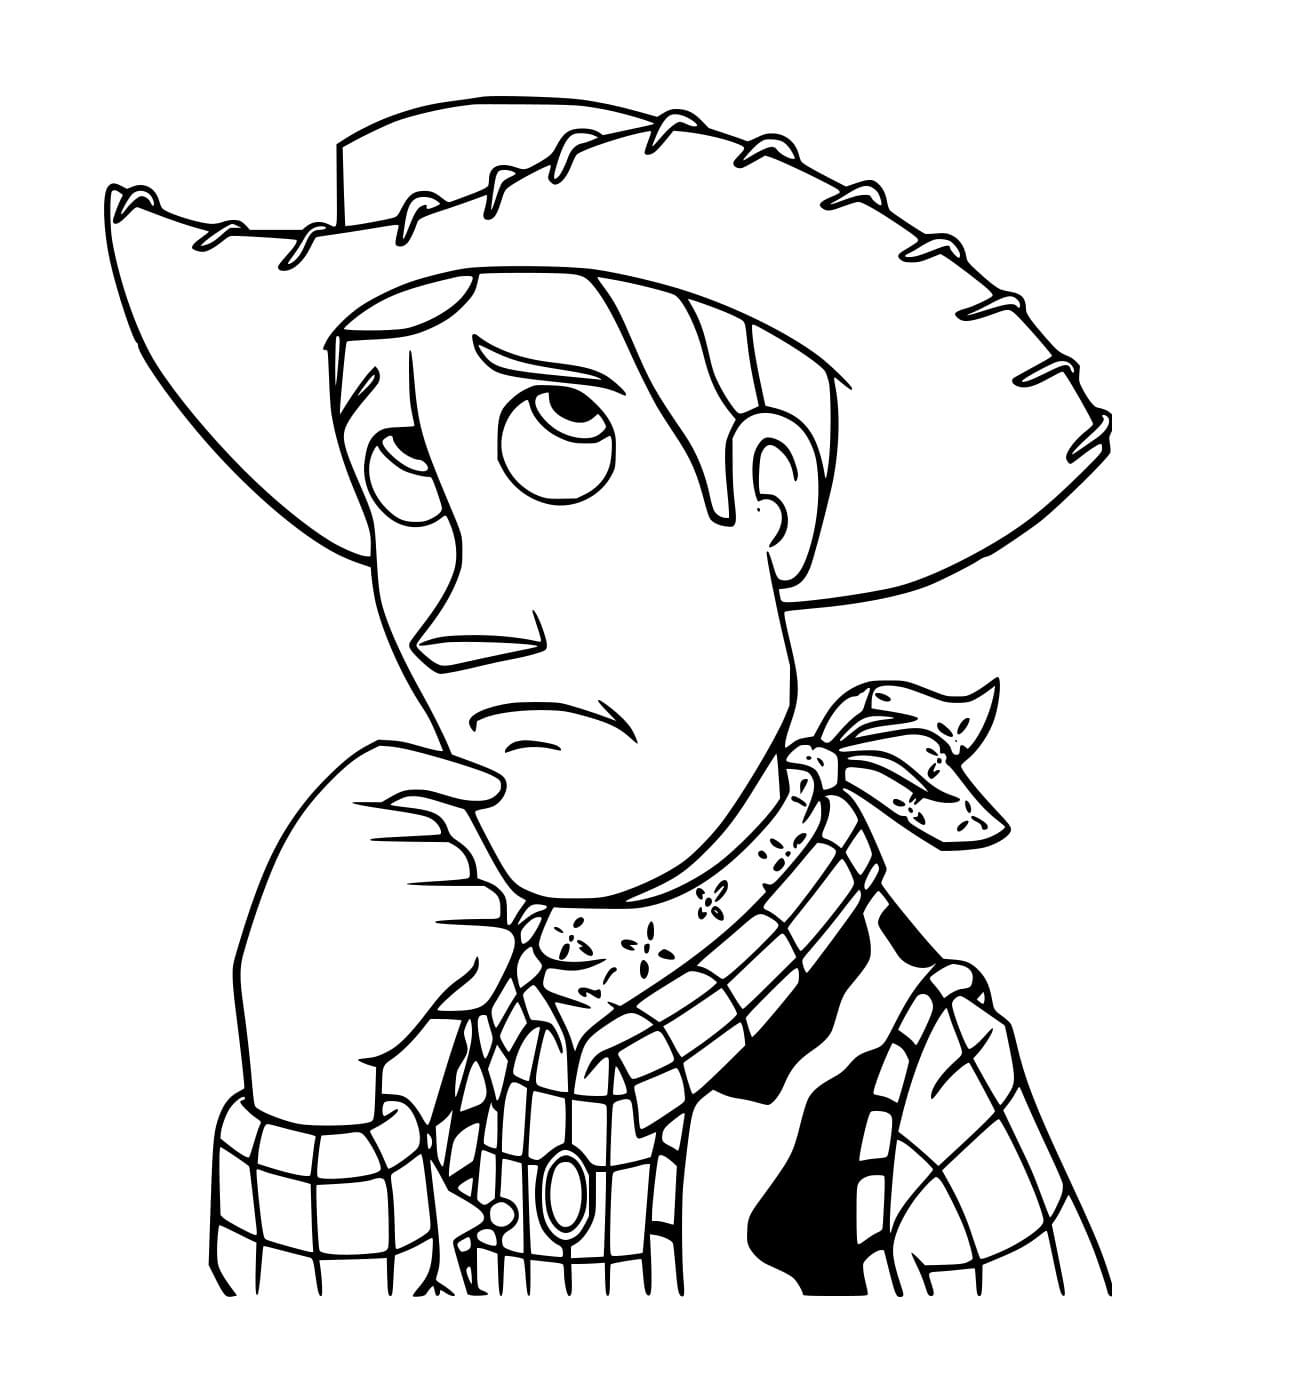 Woody Thinking Coloring Page